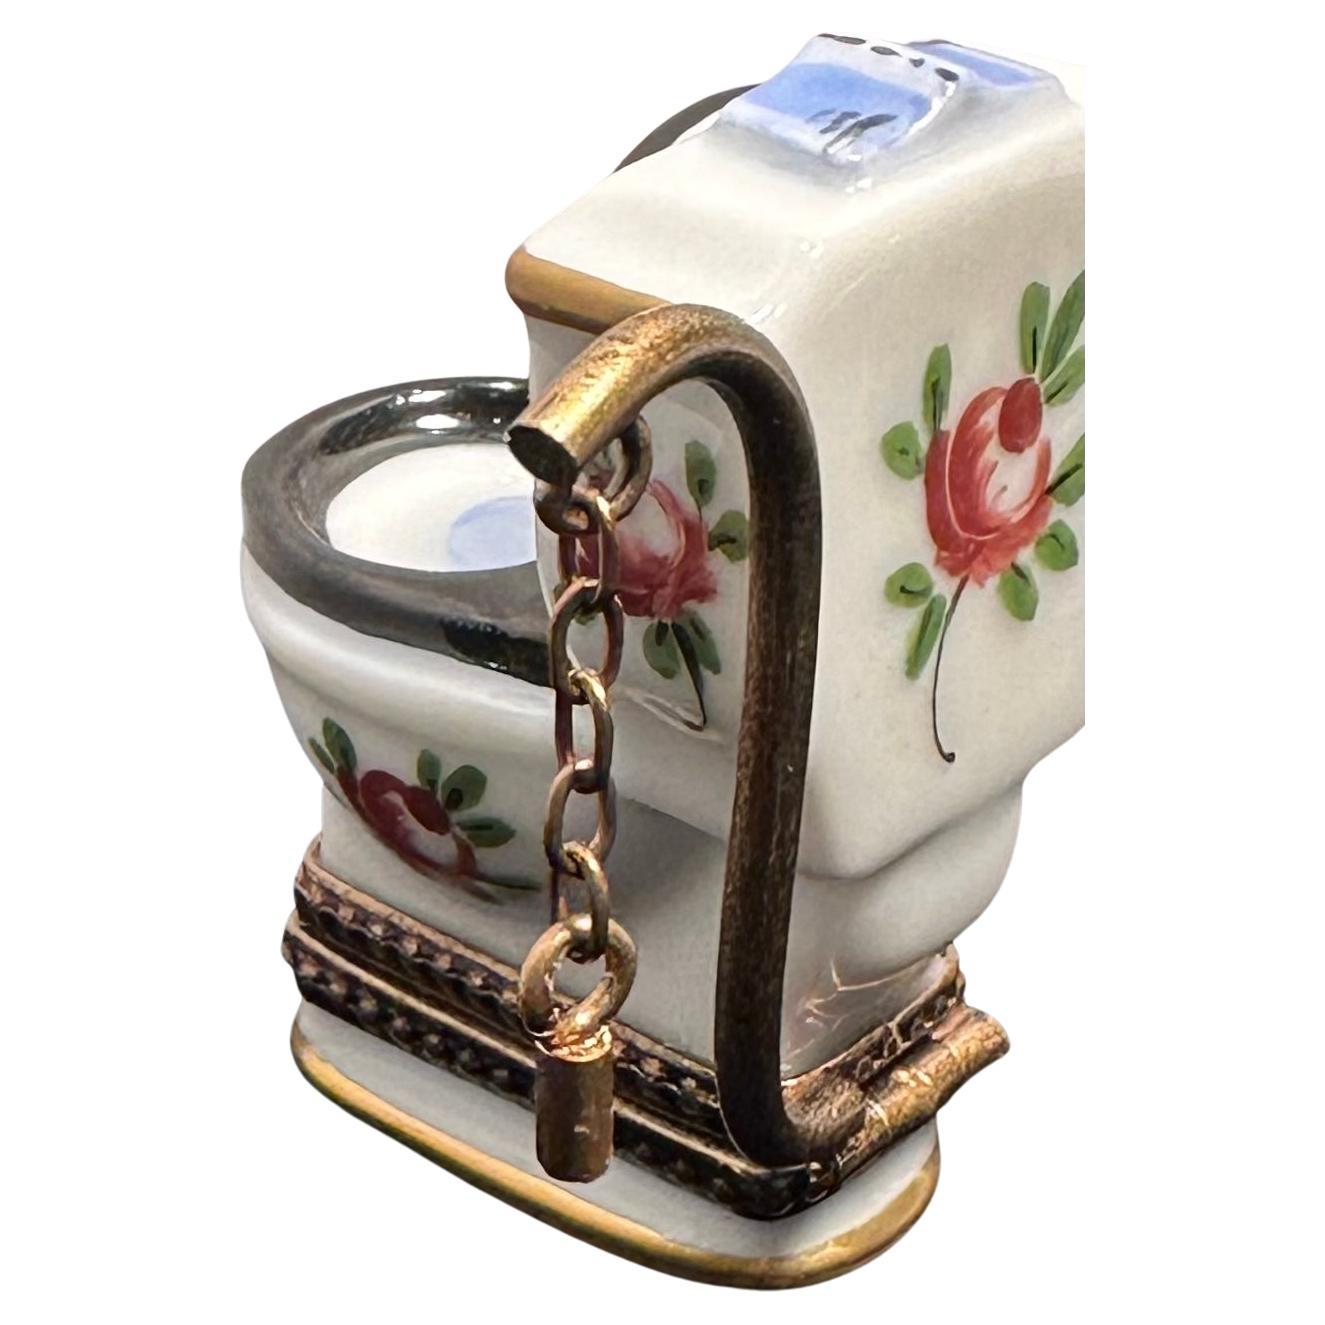 Collectible handmade and hand painted Limoges France porcelain miniature toilet shaped trinket box features a white background with pretty hand painted floral motifs accenting different areas of the toilet and a contrasting black colored seat. The